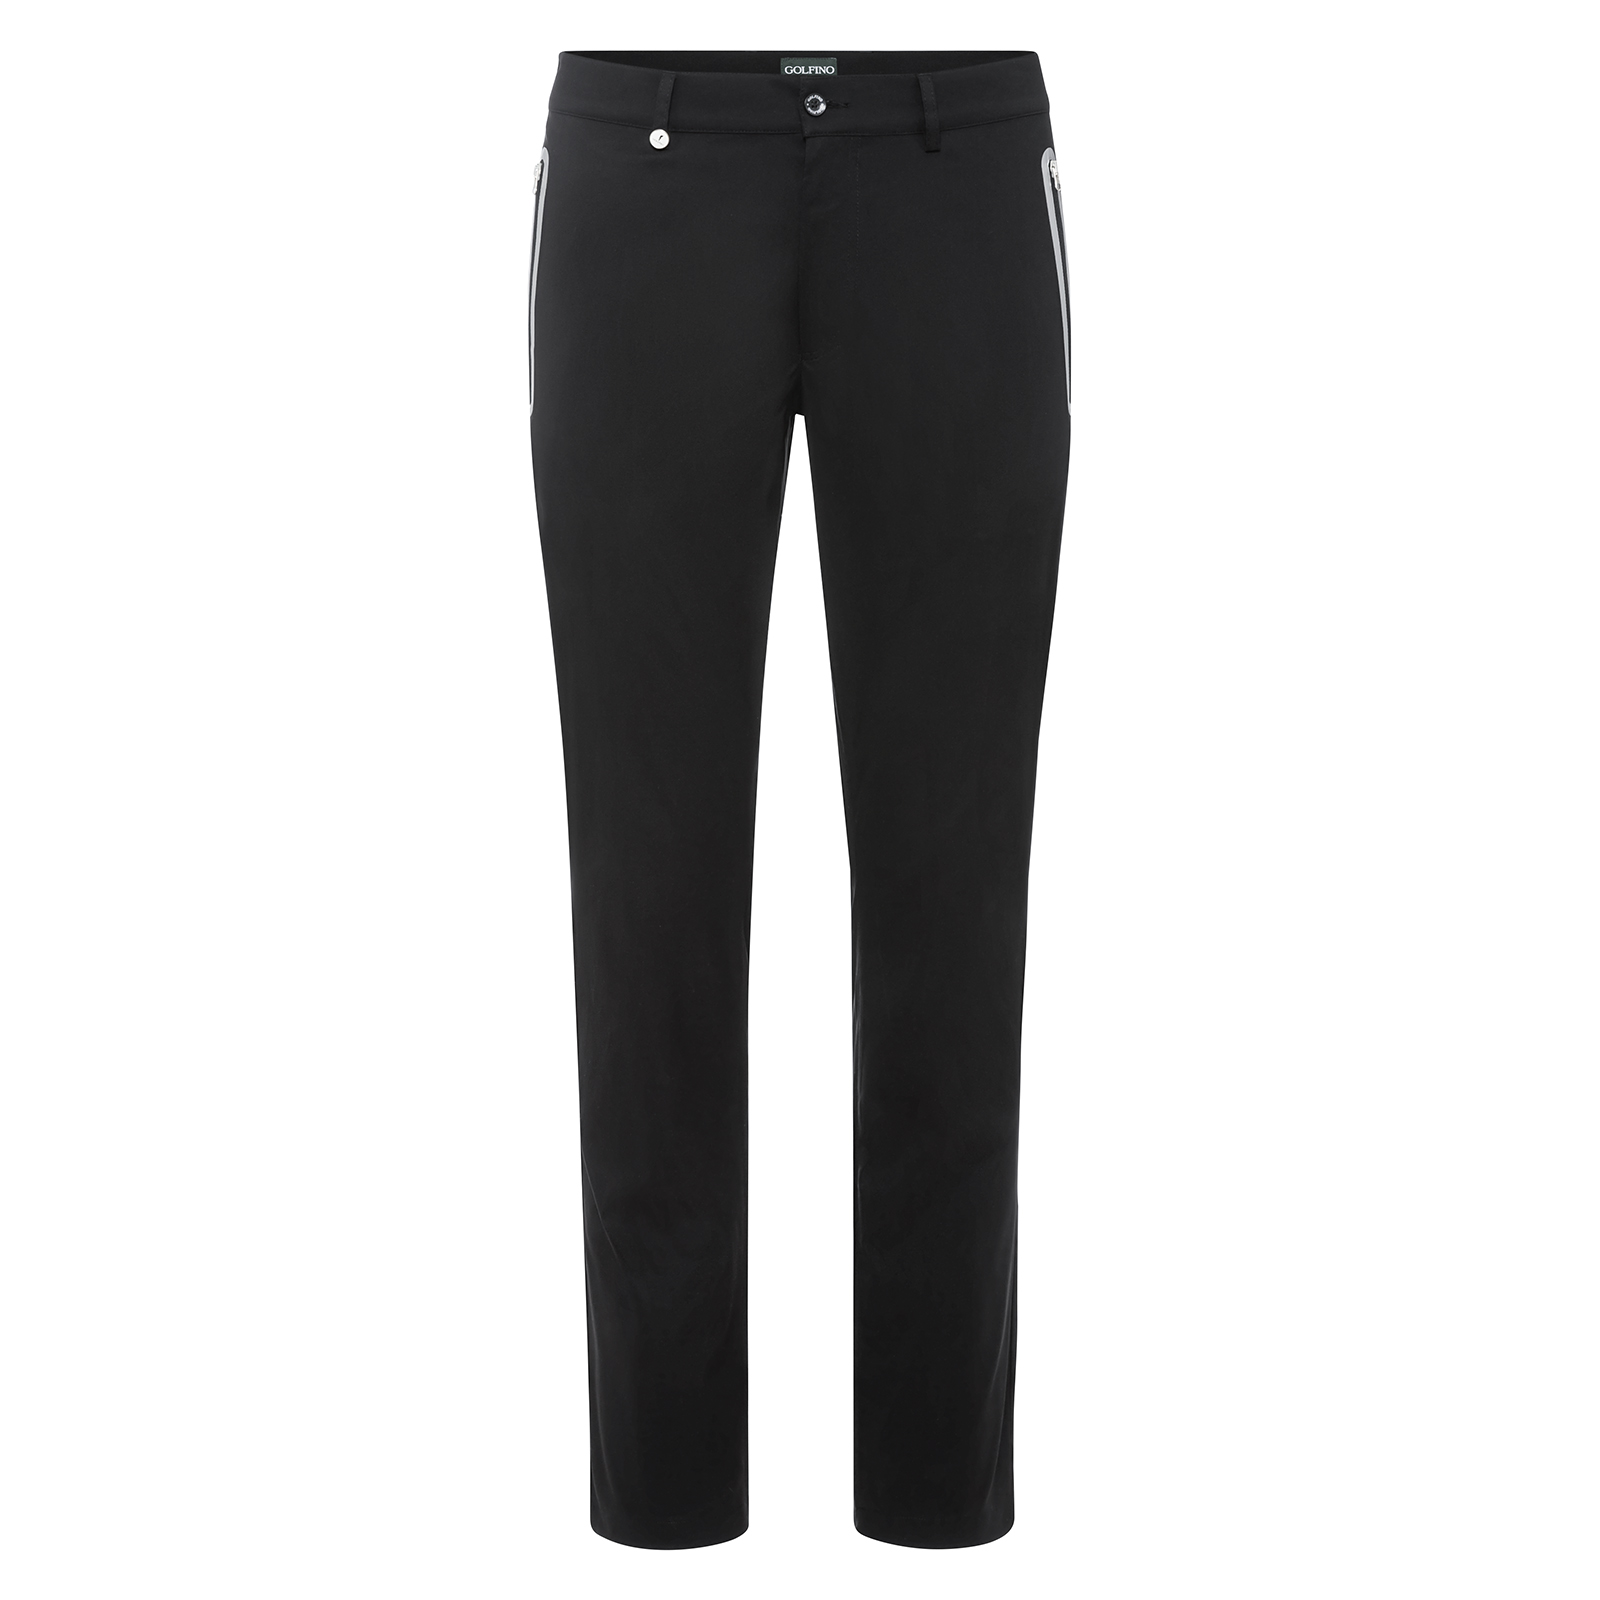 Men's stretch golf trousers with cold weather protection